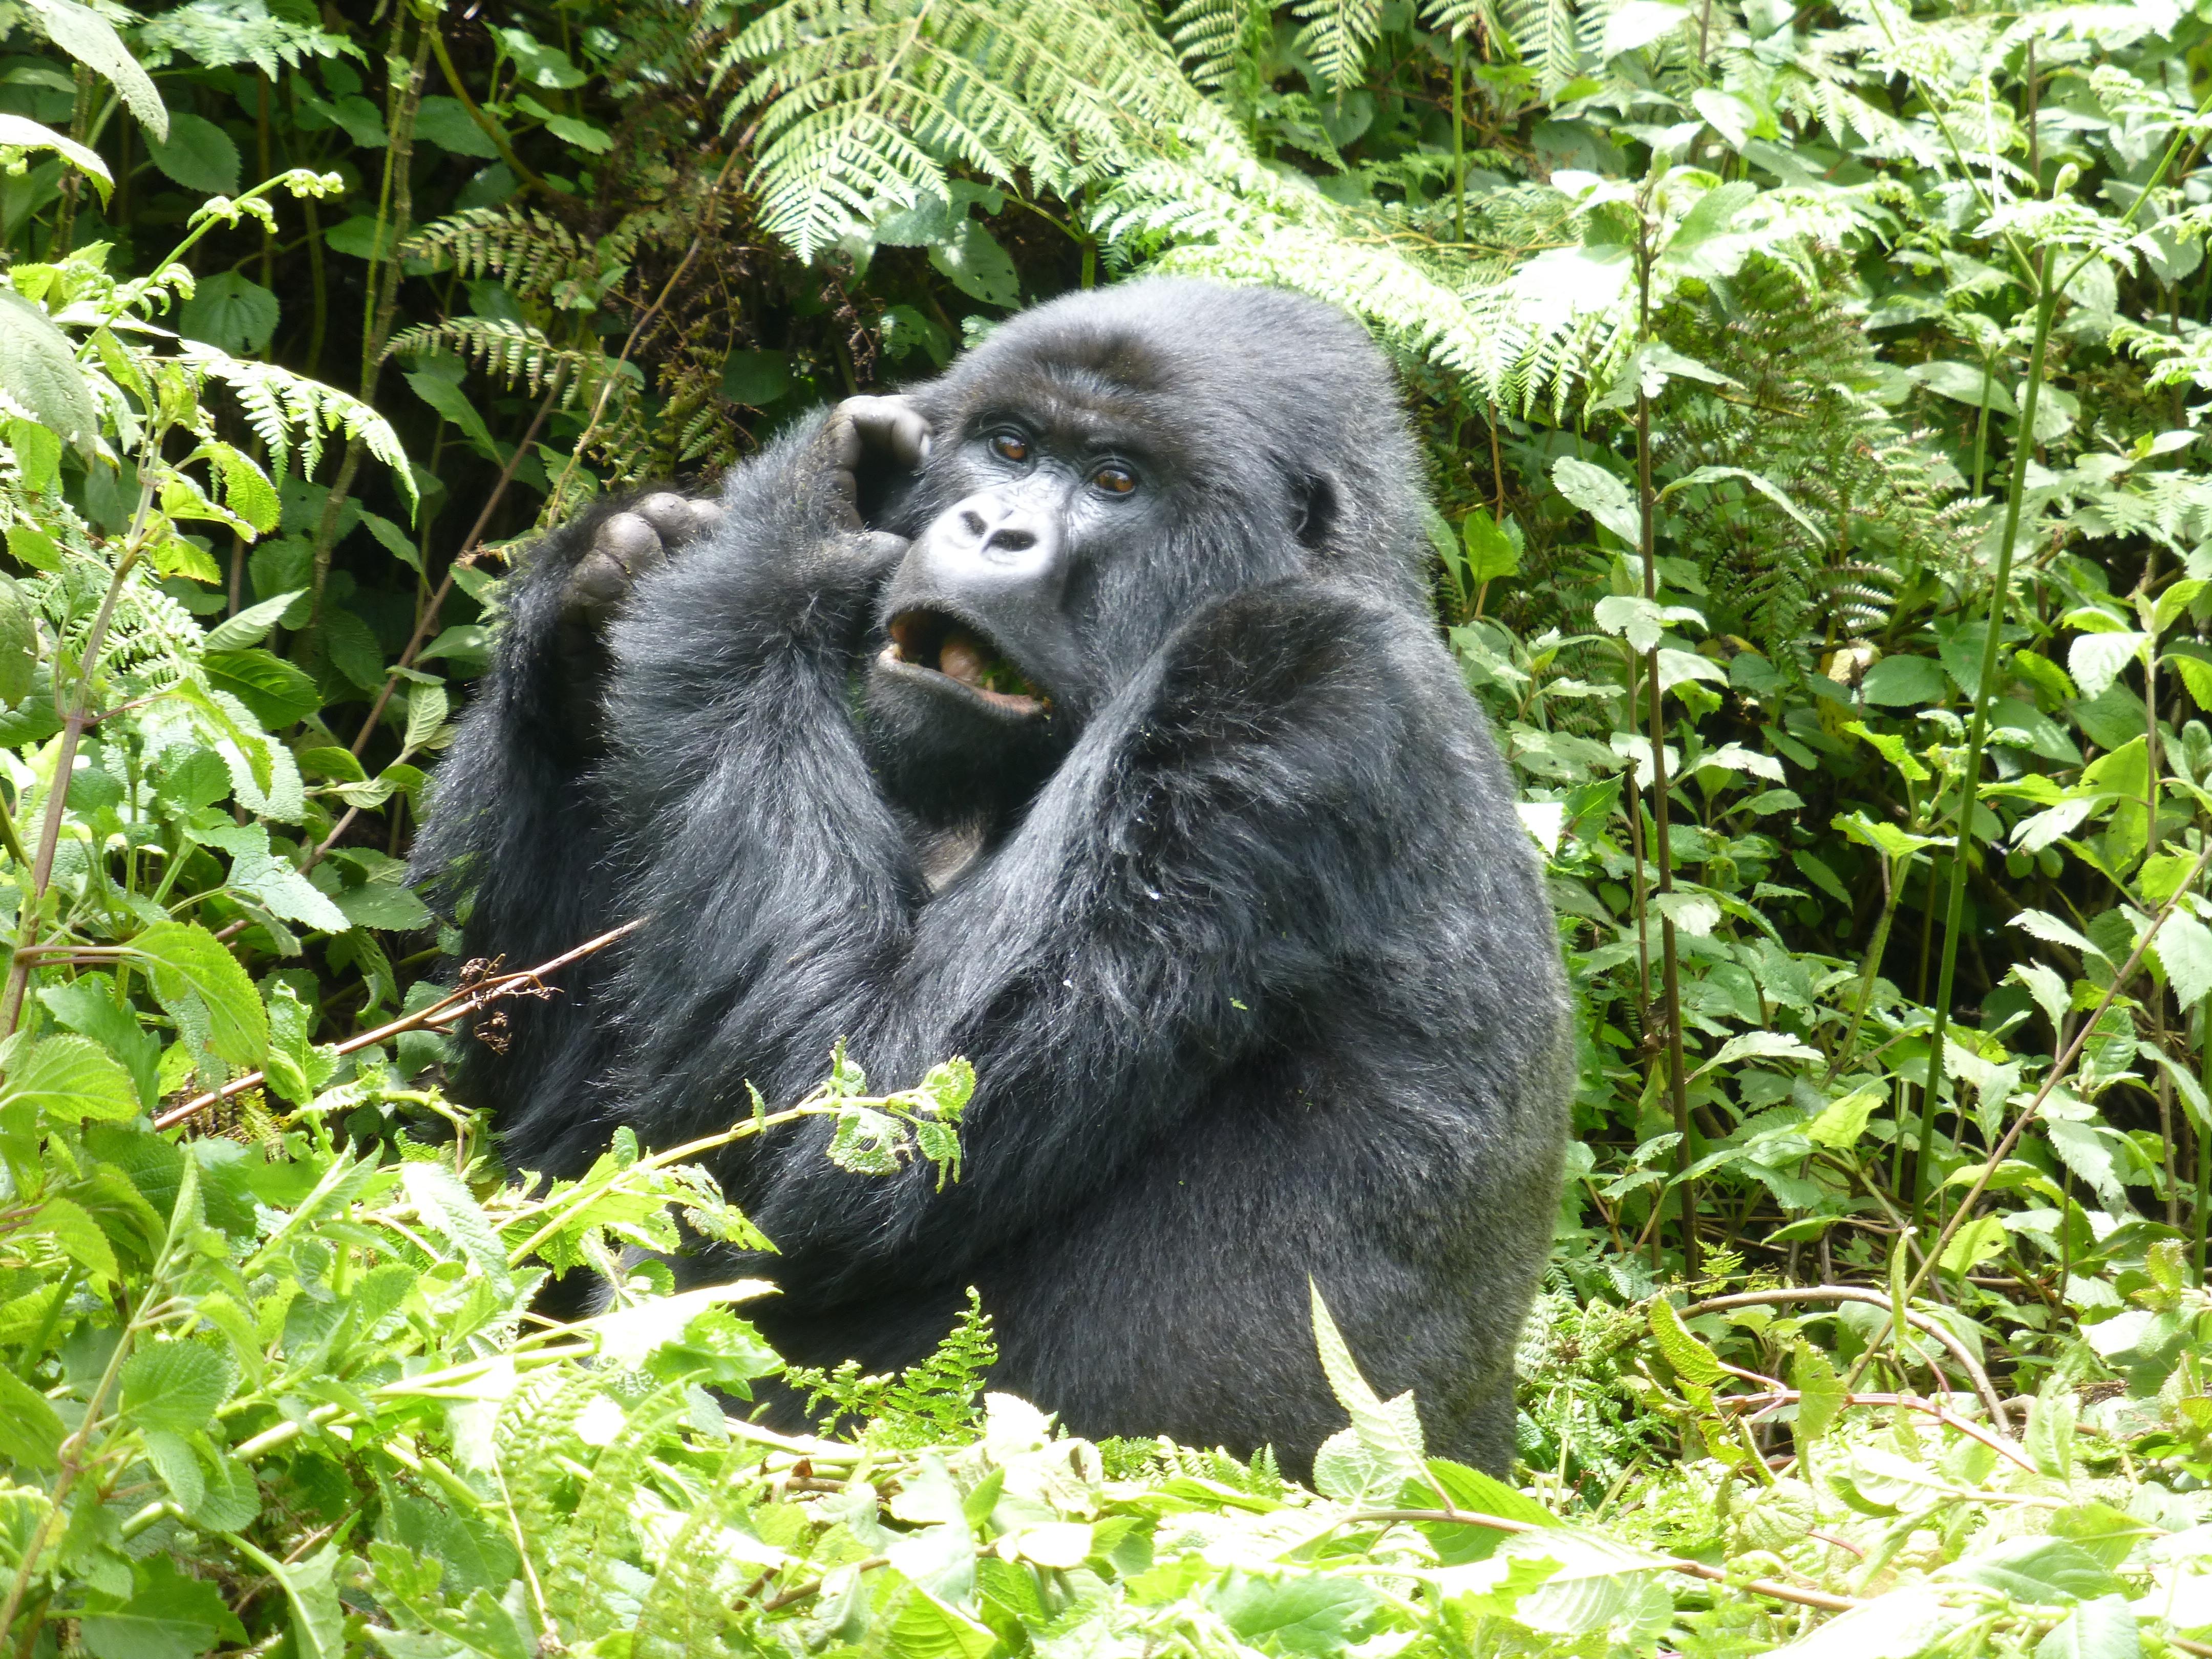 Getting to Bwindi Impenetrable National Park